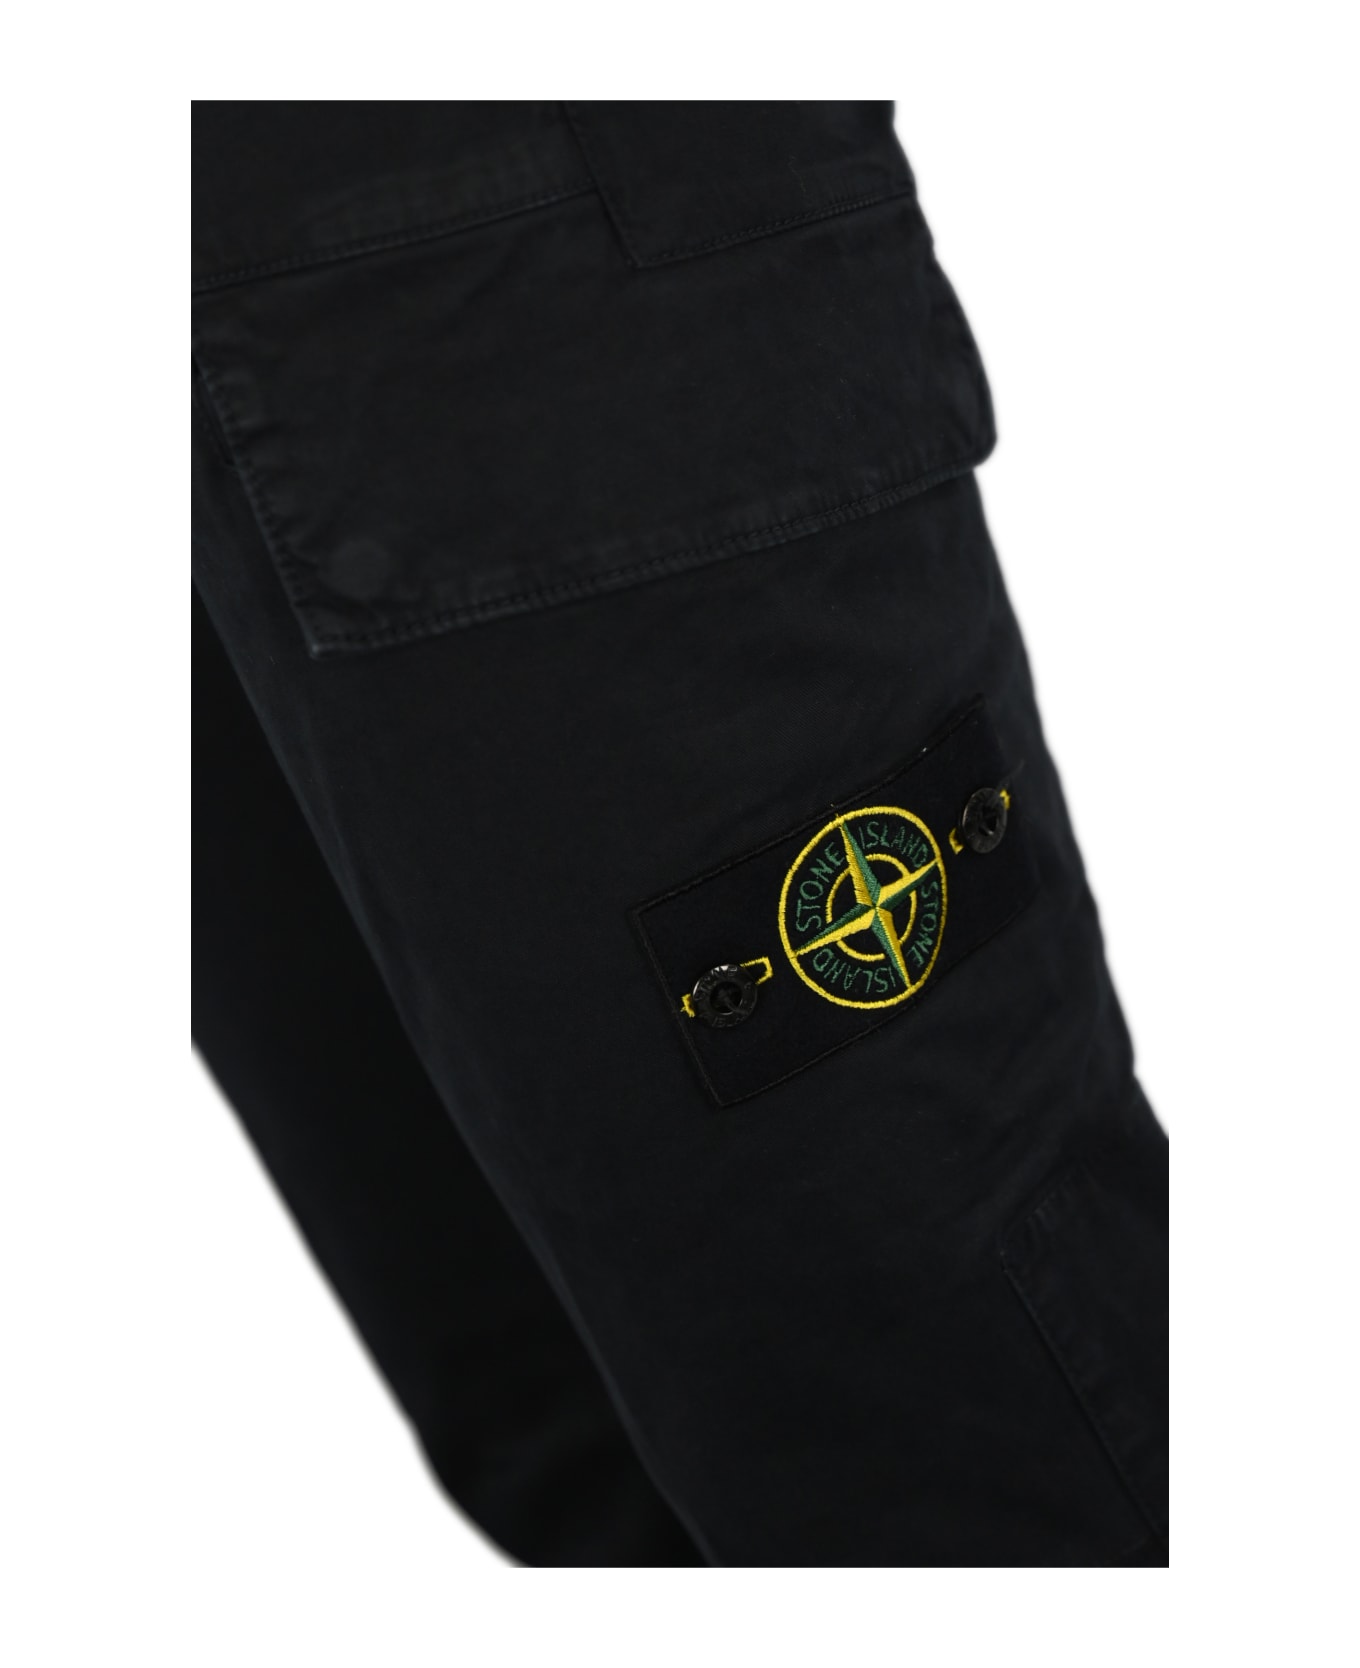 Stone Island Cargo Trousers 30604 Old Treatment - Navy blue ボトムス